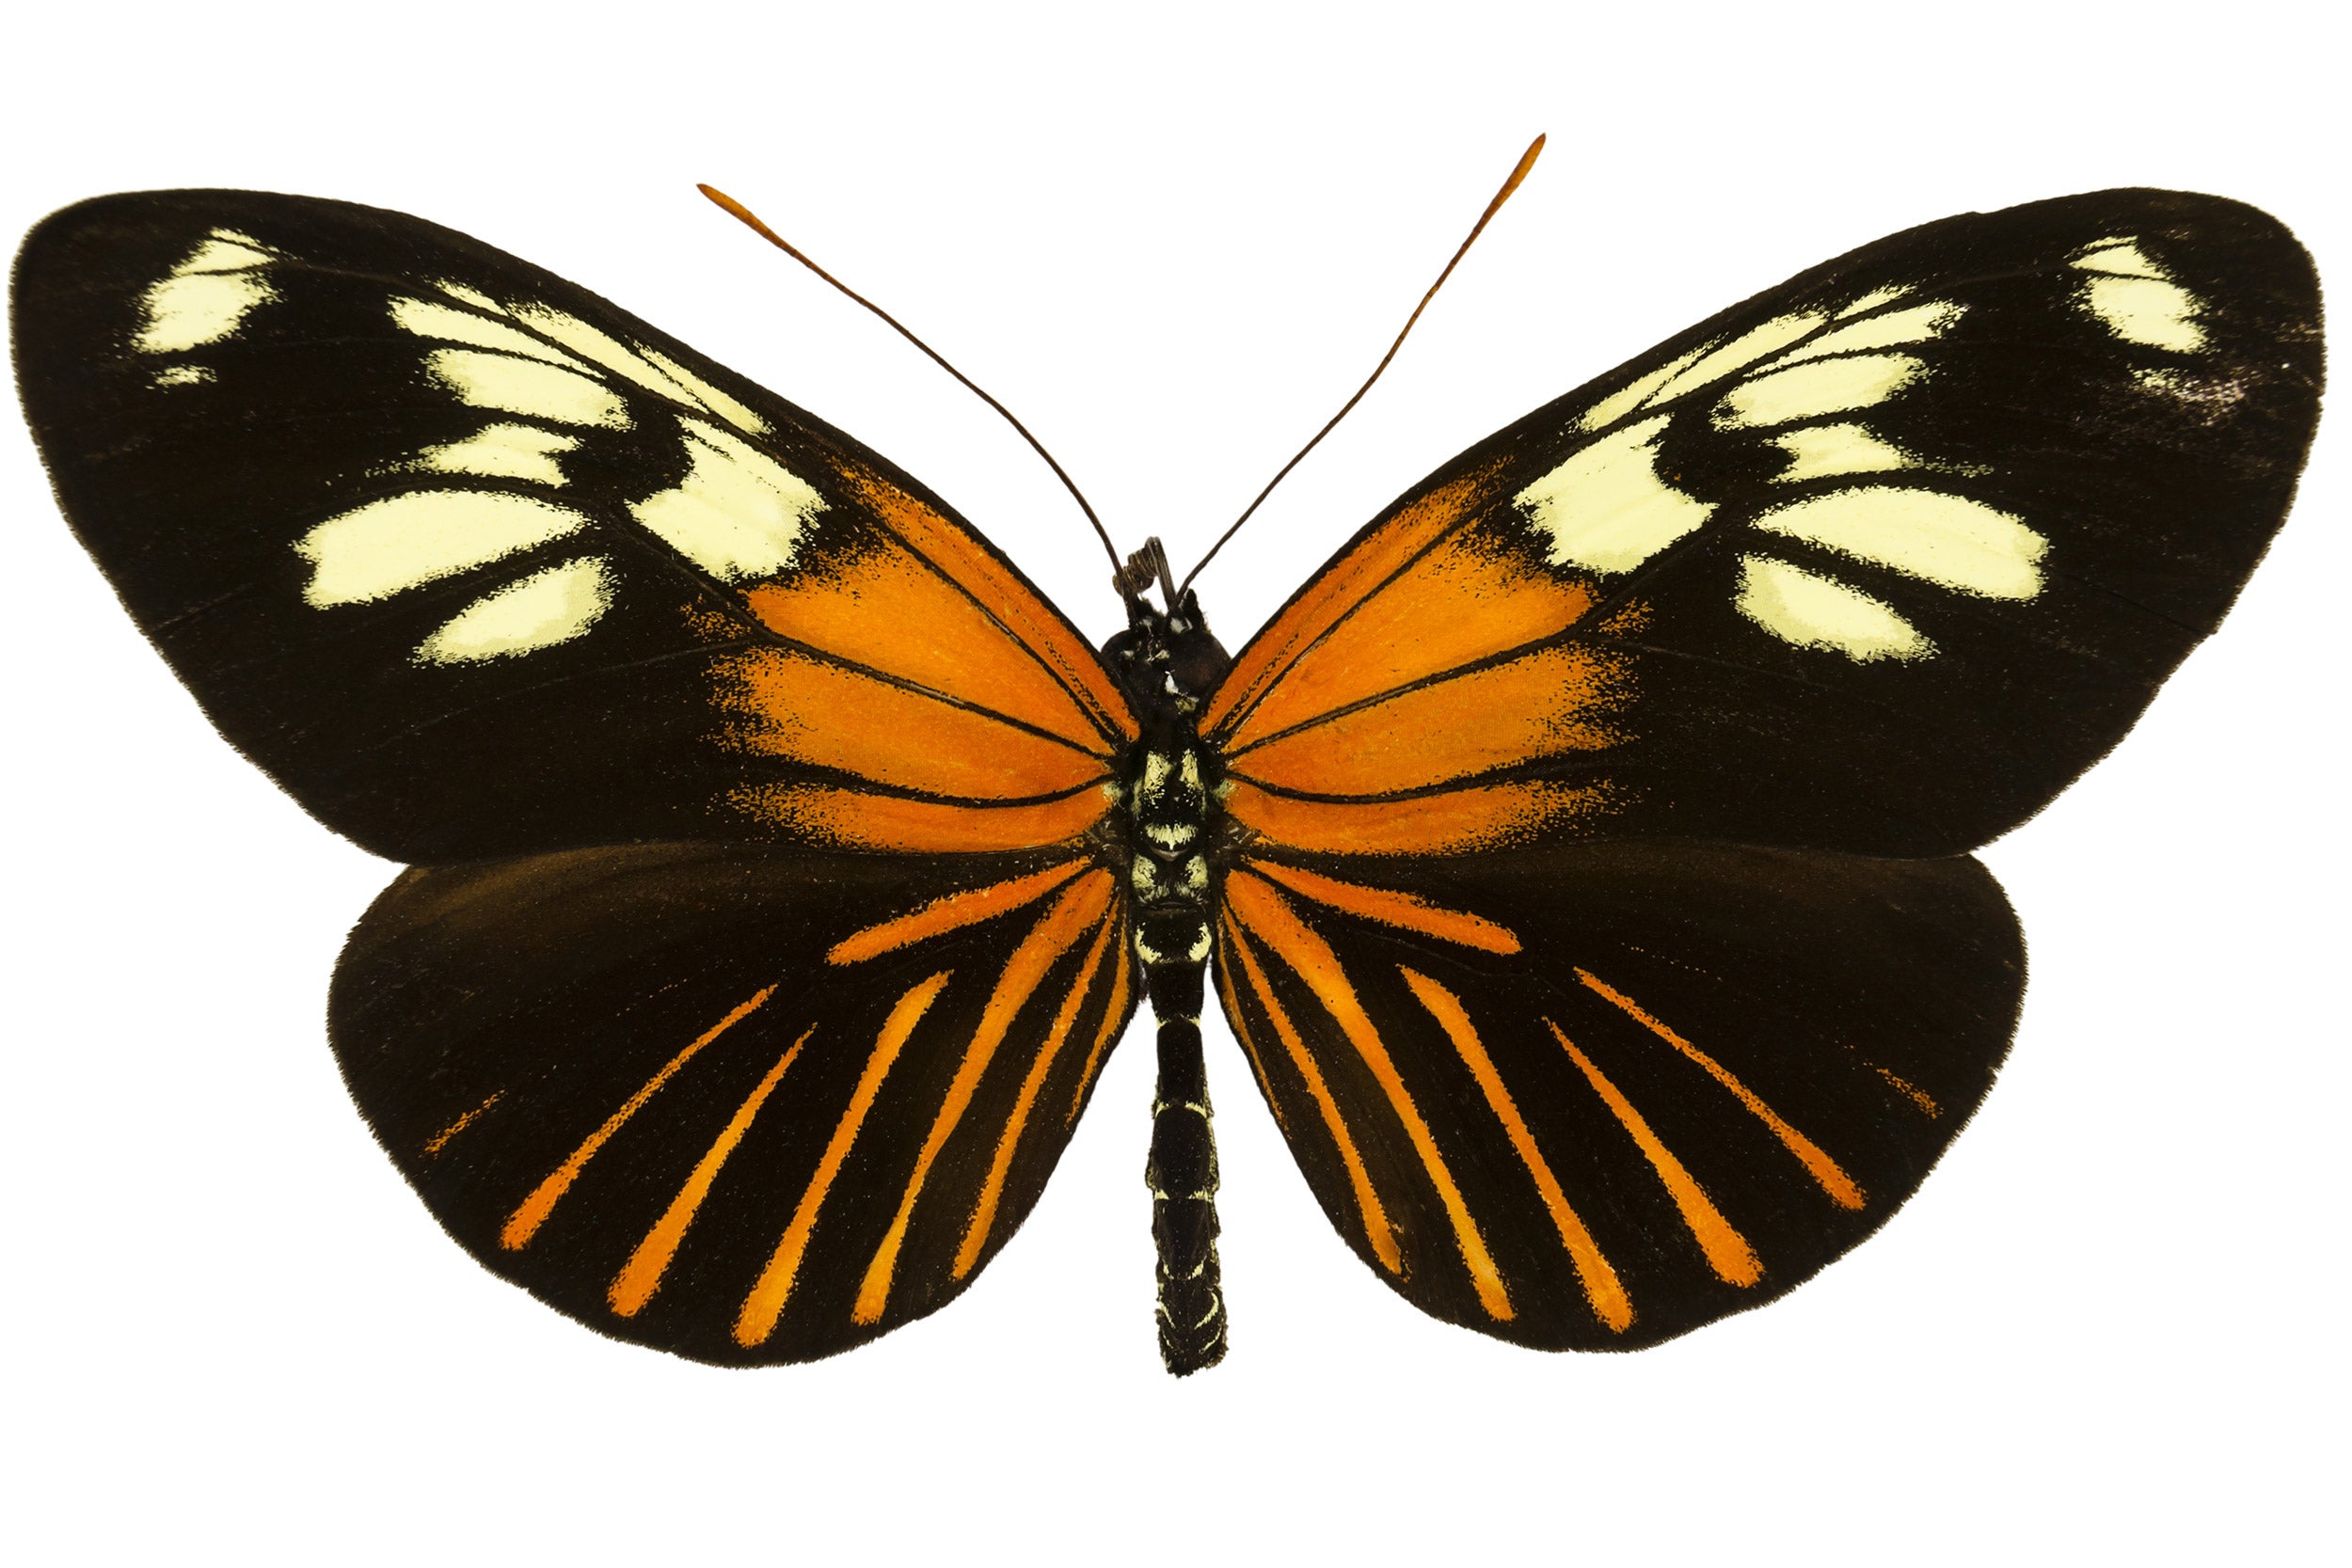 Heliconius xanthocles butterfly illustration with wings spread.